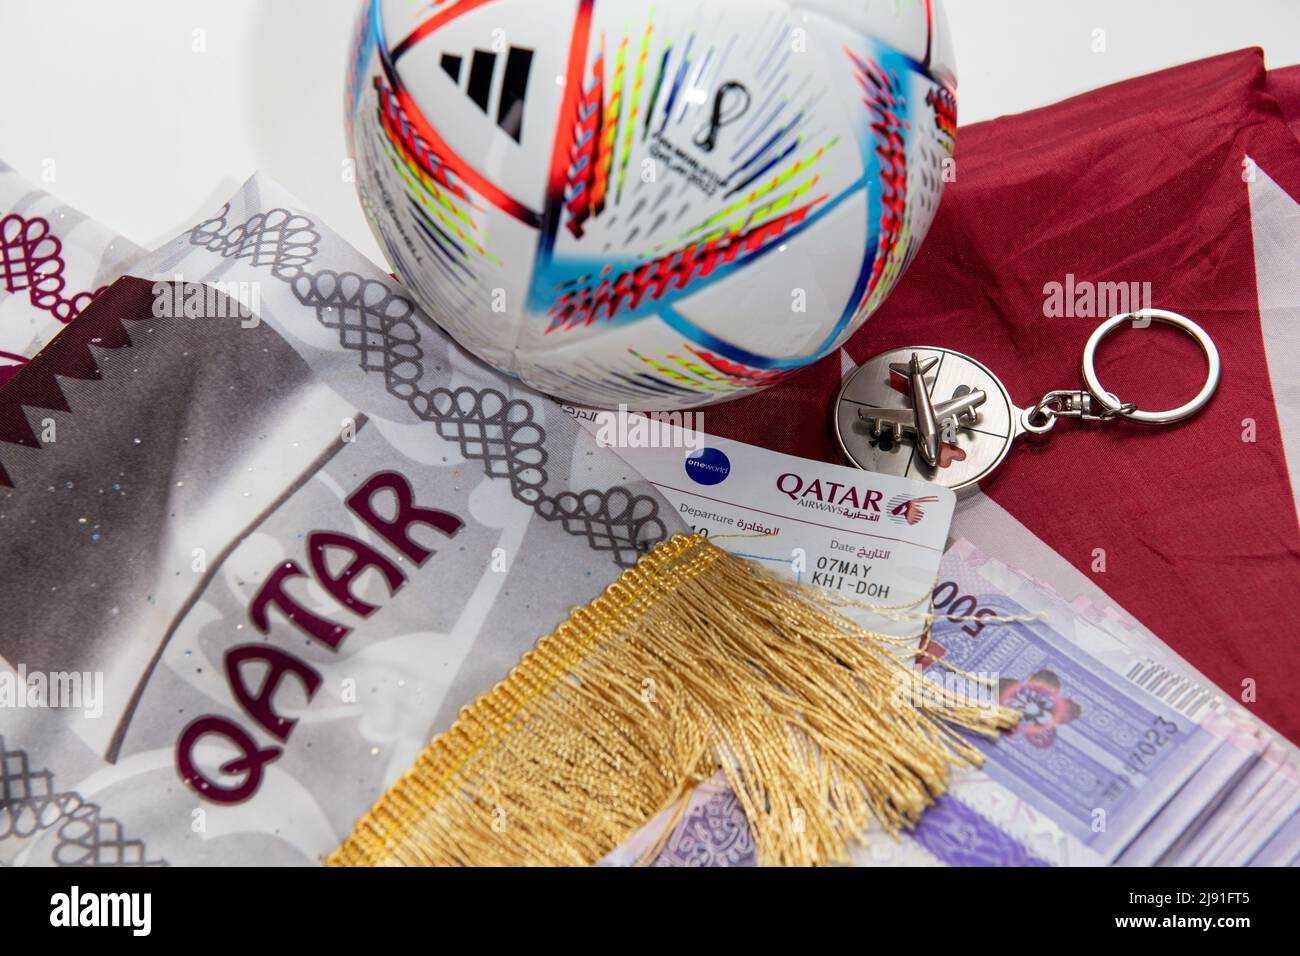 Qatar Fifa Football world cup travel plane. Sports and travel concept Stock Photo